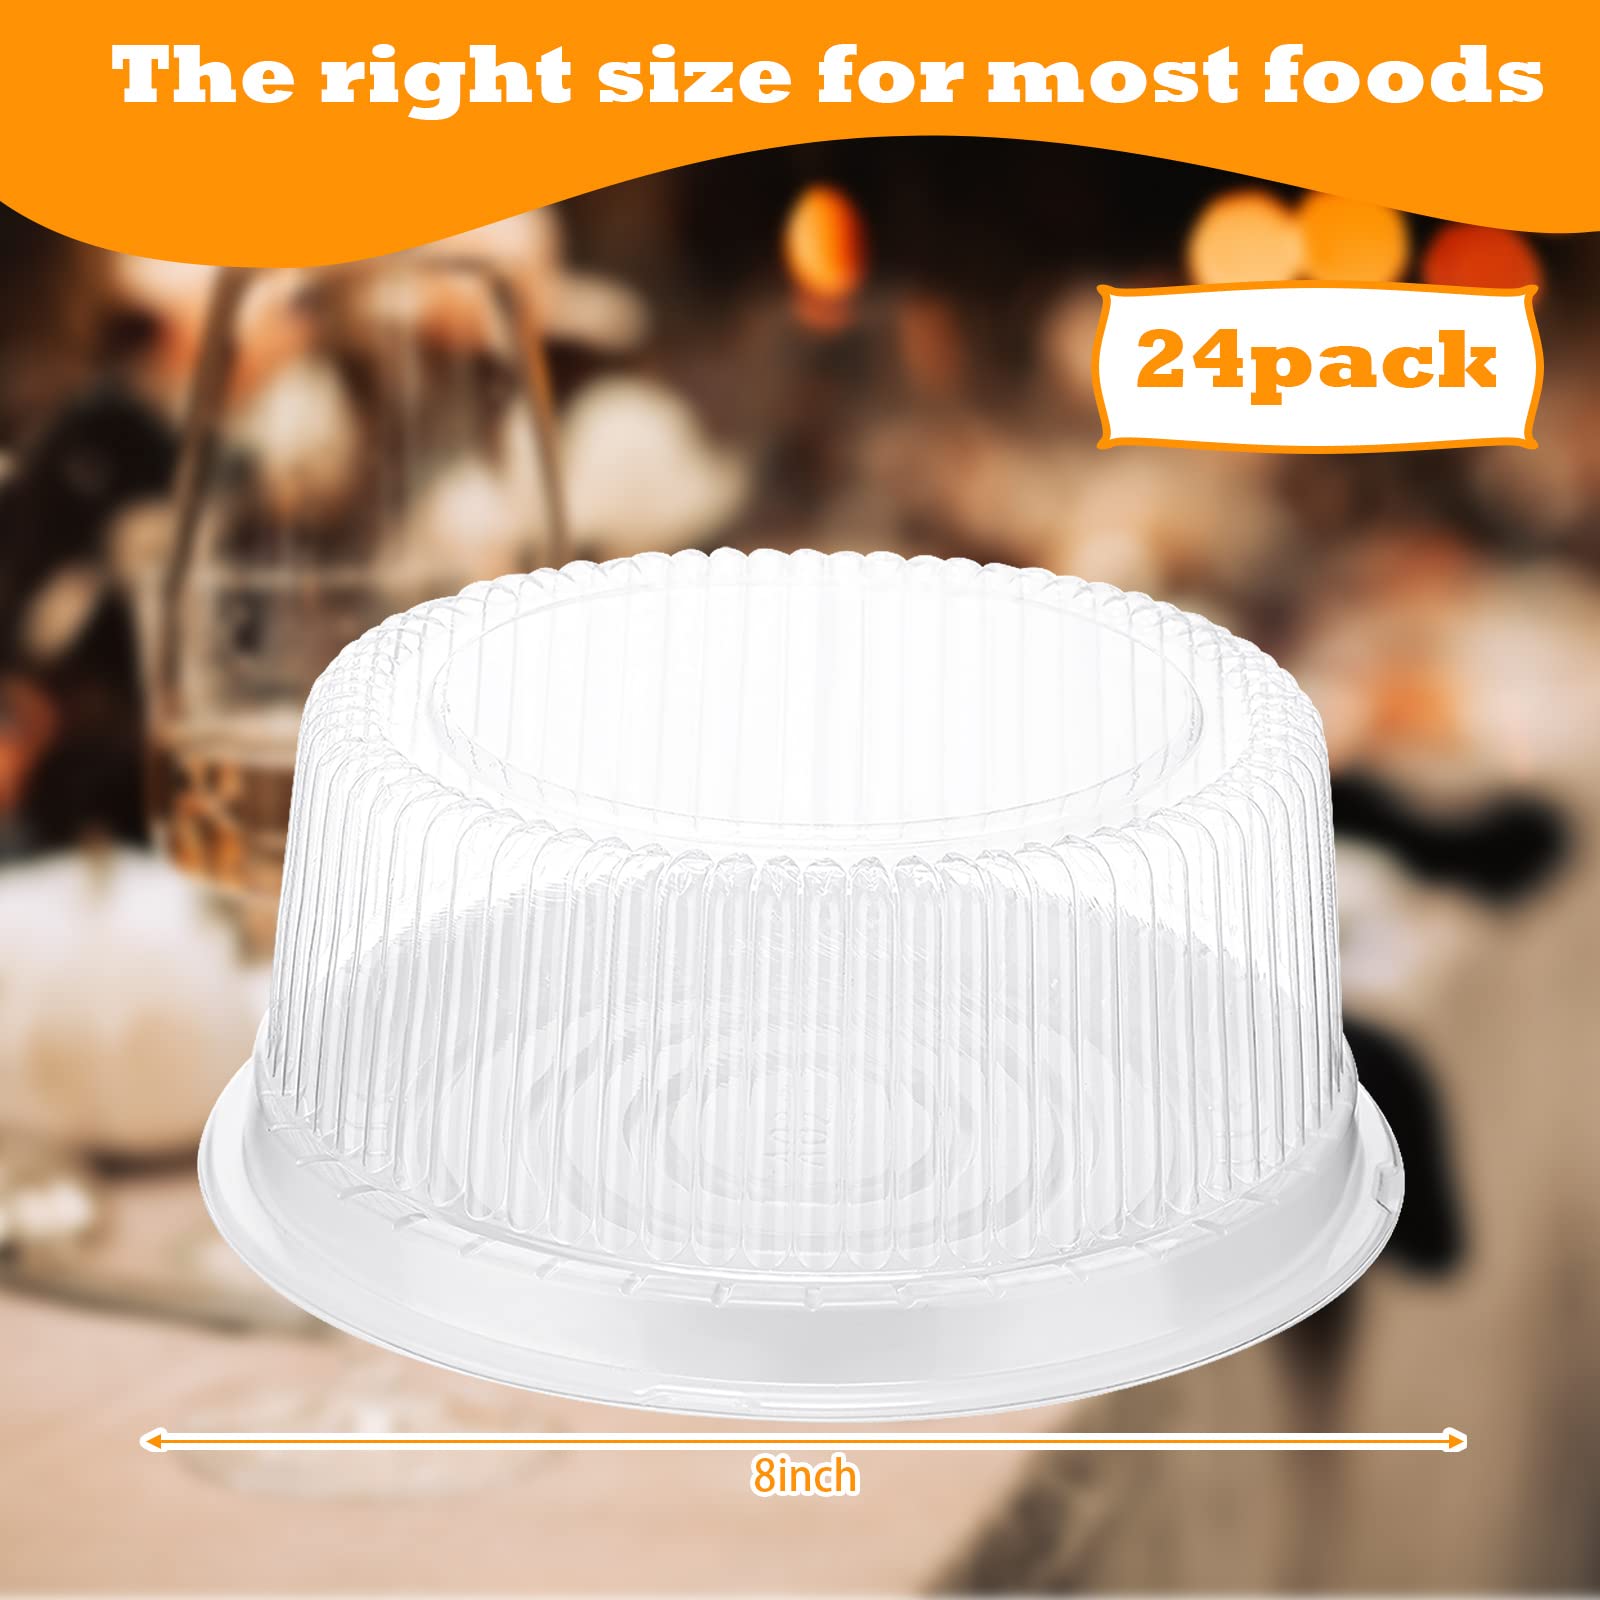 Nuanchu 24 Pieces 8 Inch Disposable Cake Containers with Lids Plastic Serving Tray Clear Platters with Clear Lids Round Disposable Cake Holder for Storing Party Takeout Food Catering Display (White)